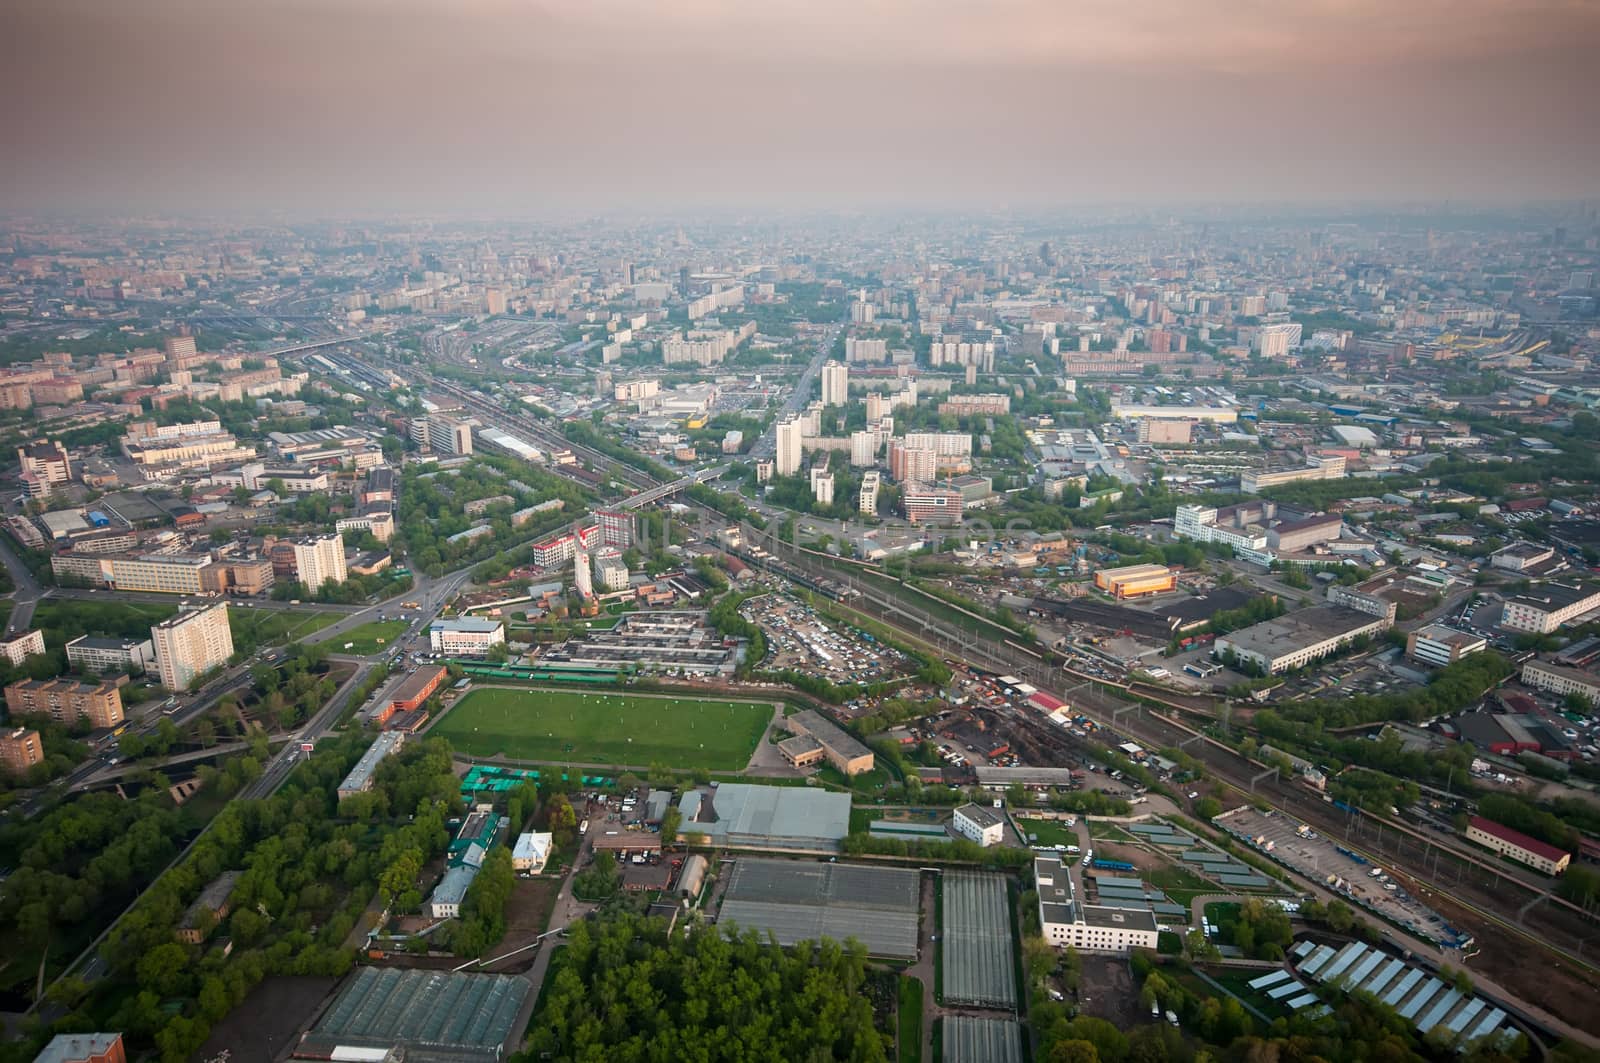 Bird's eye view on Alekseevsky district and Ostankino district in Moscow Russia